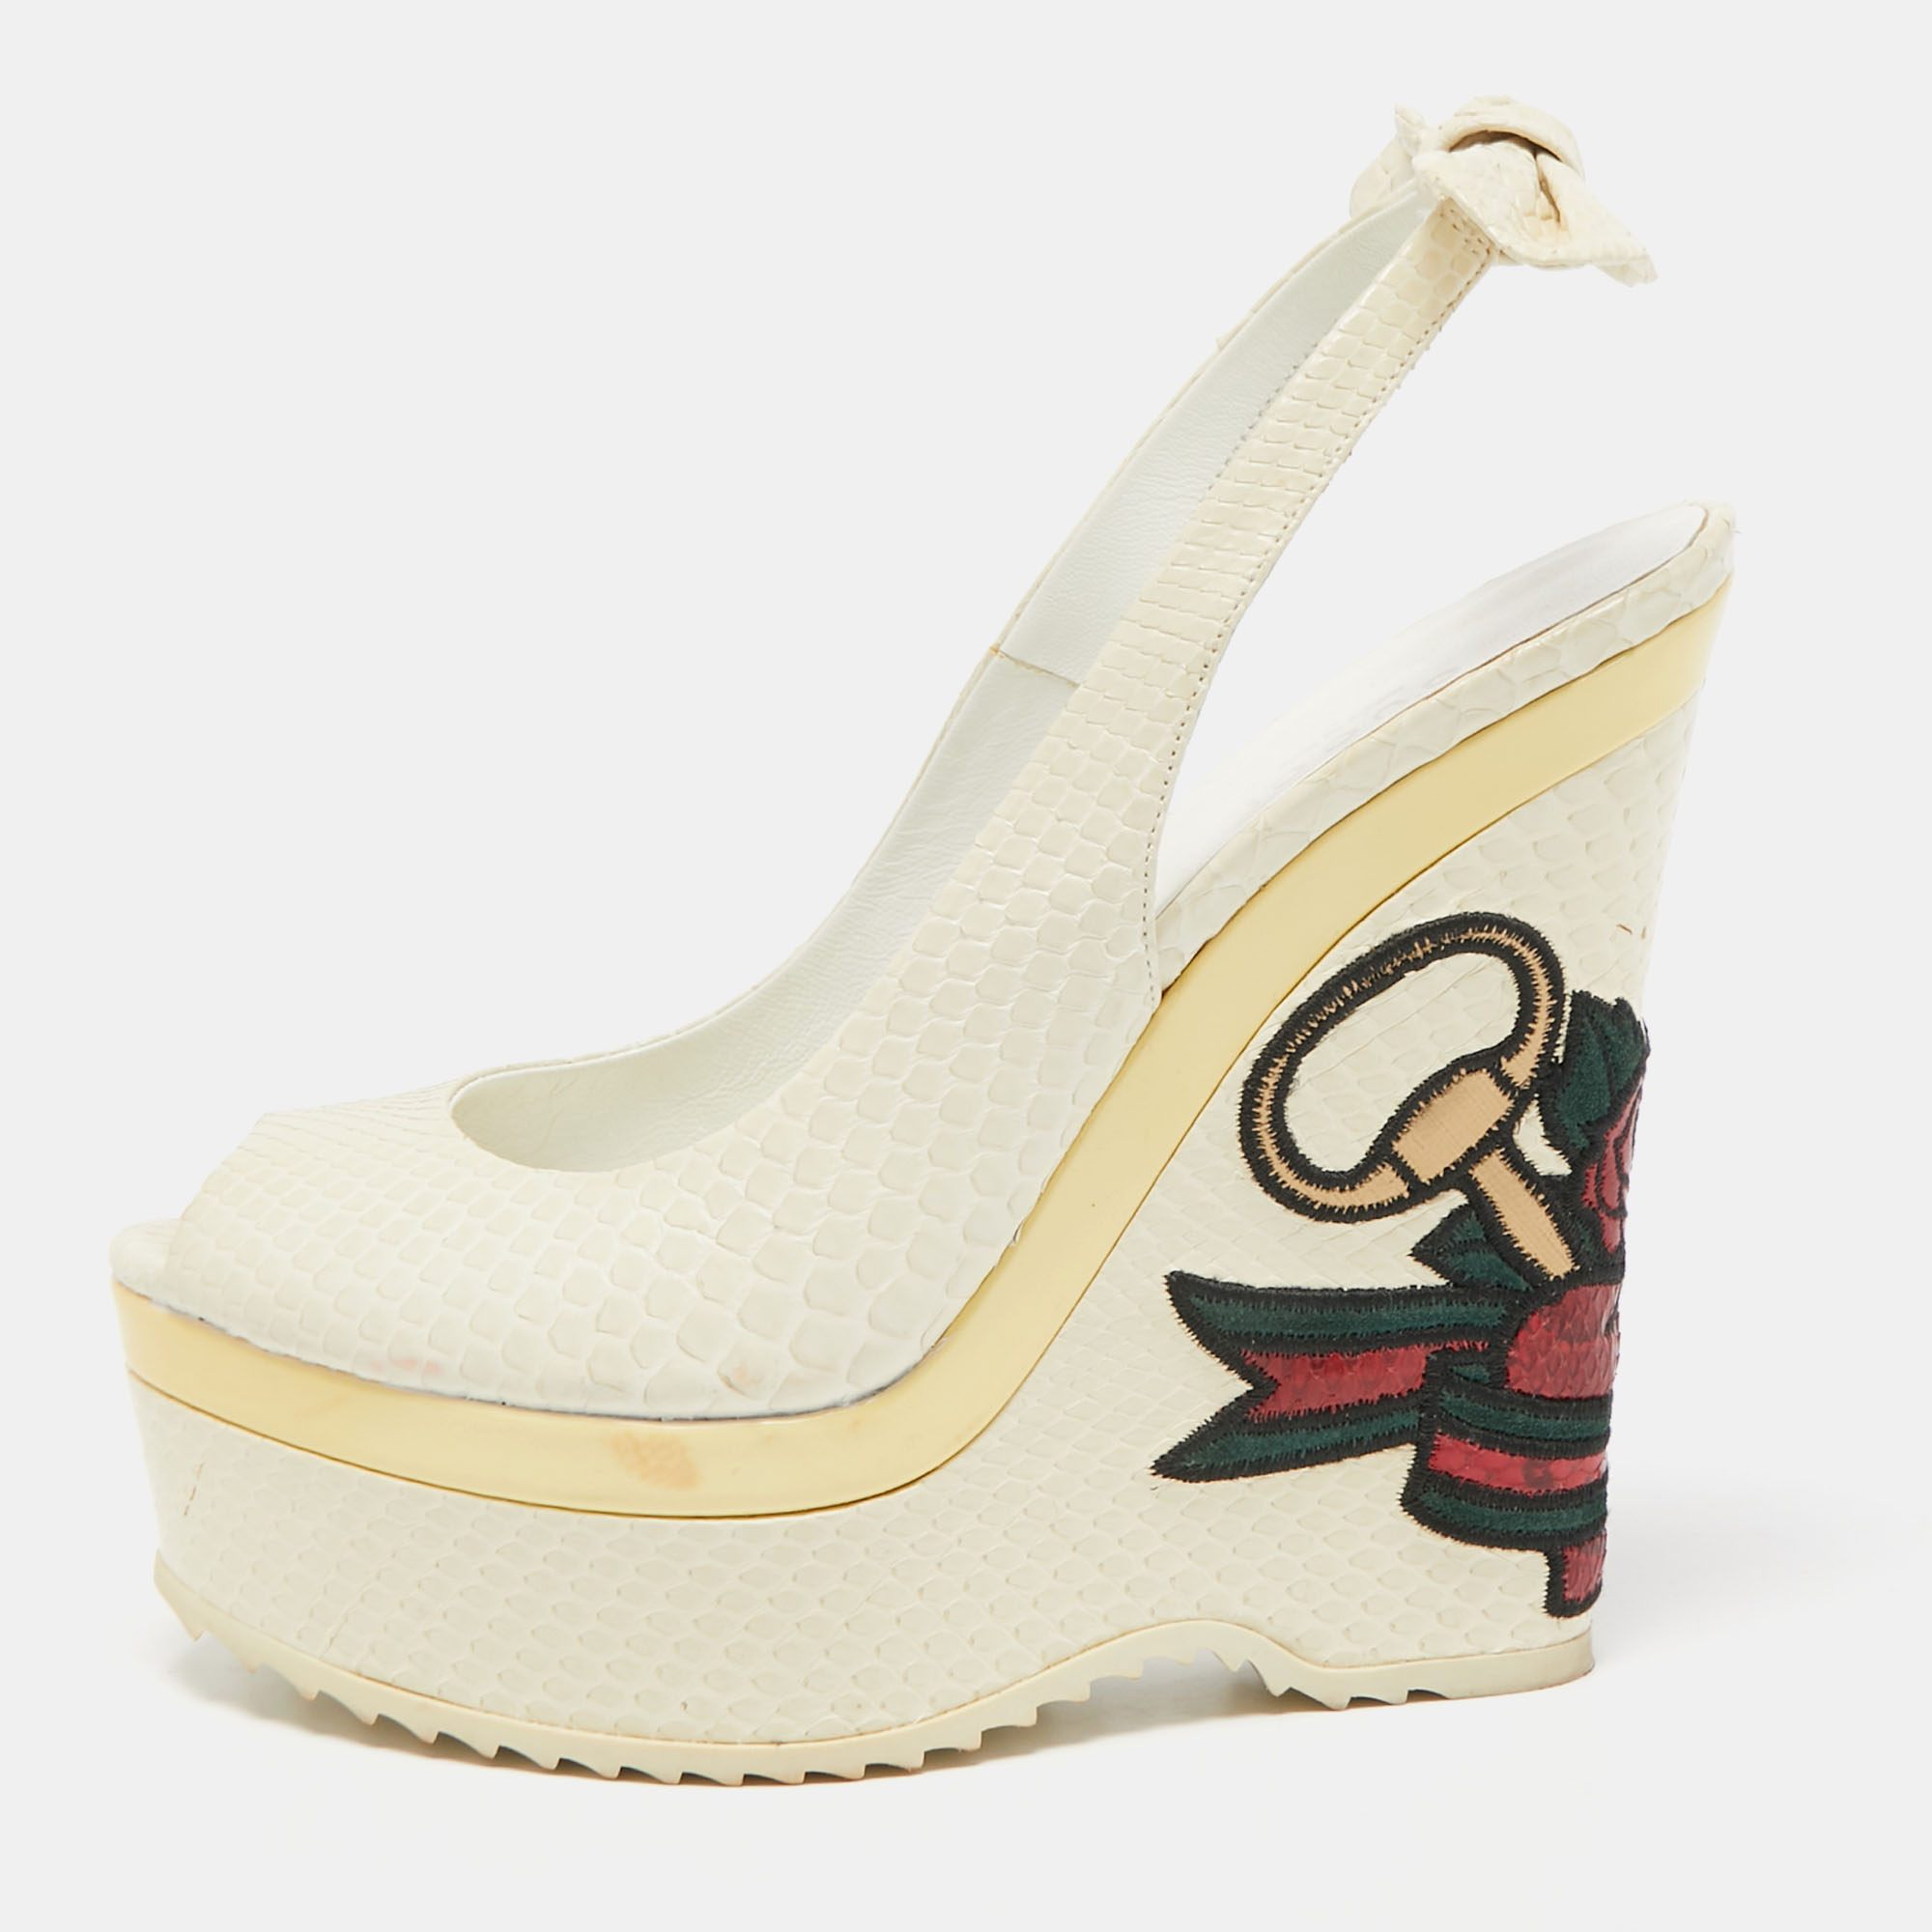 Gucci White Leather Espadrille Wedge Sandals Size 7.5/38 - Yoogi's Closet